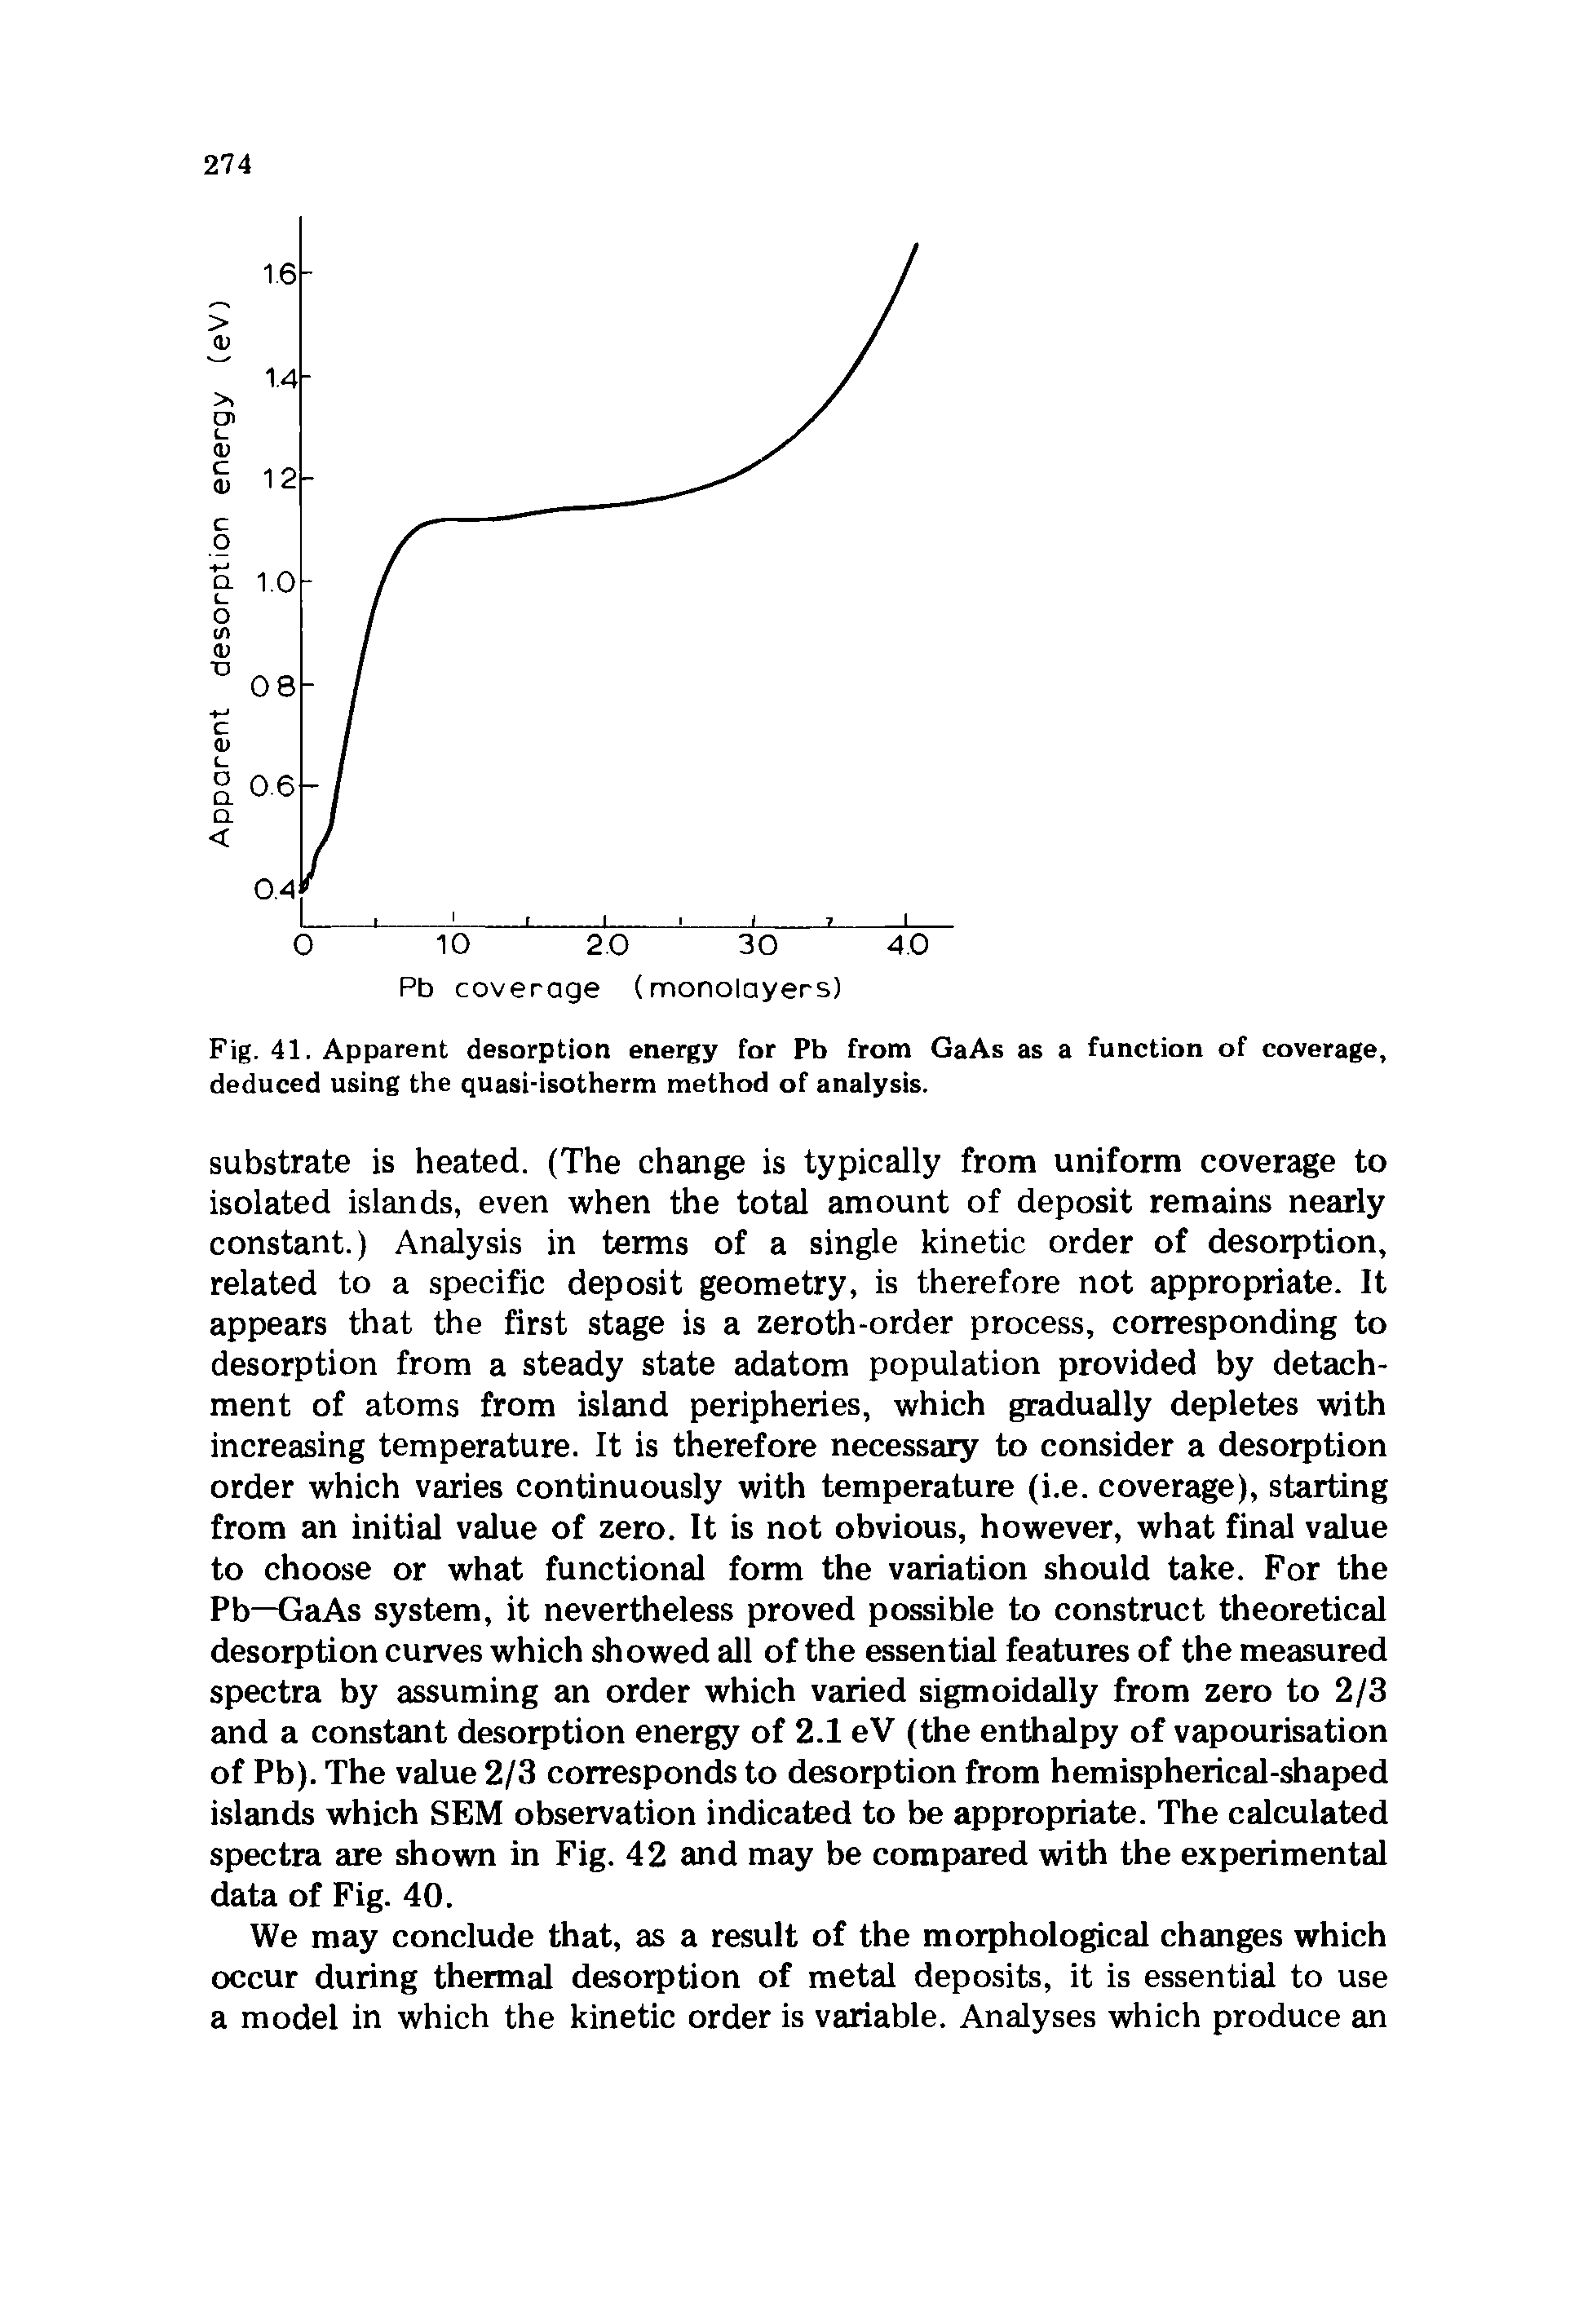 Fig. 41. Apparent desorption energy for Pb from GaAs as a function of coverage, deduced using the quasi-isotherm method of analysis.